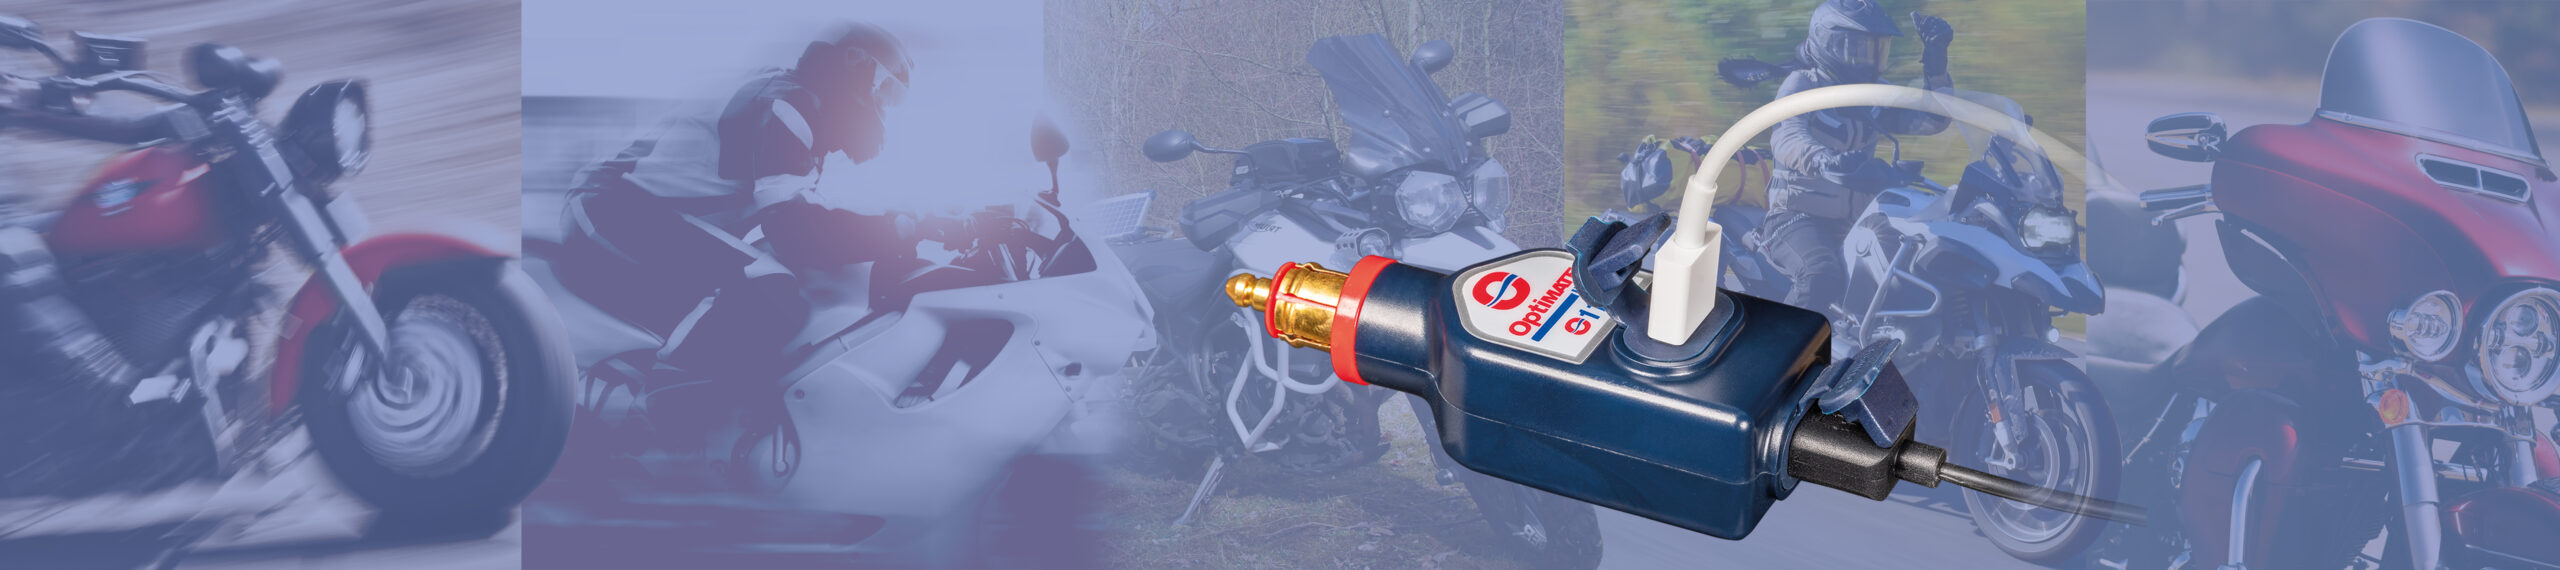 O-115, OptiMate USB charger for motorcycles